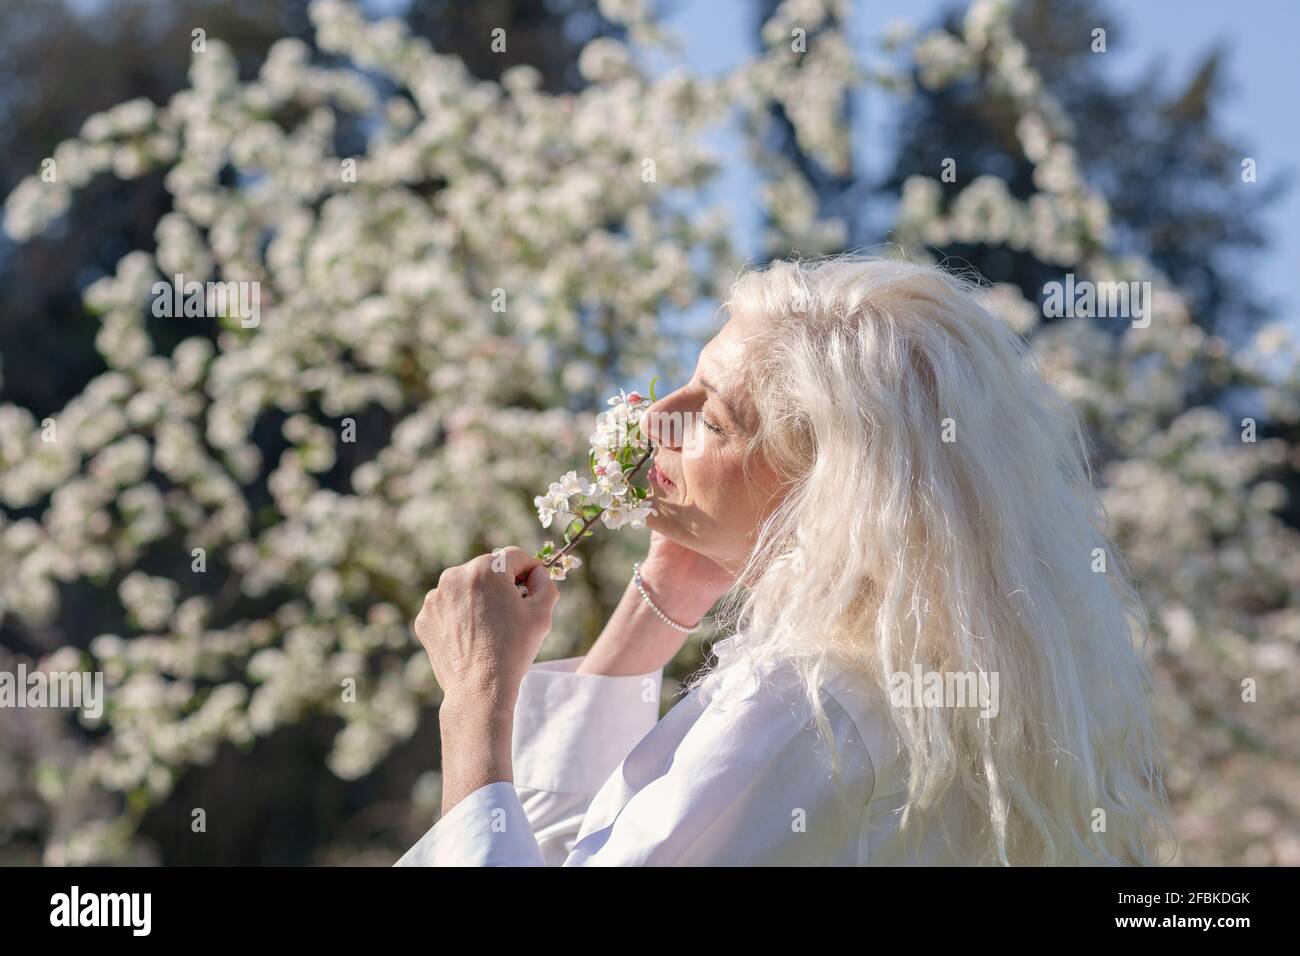 Mature woman with long white hair smelling flowers on sunny day Stock Photo